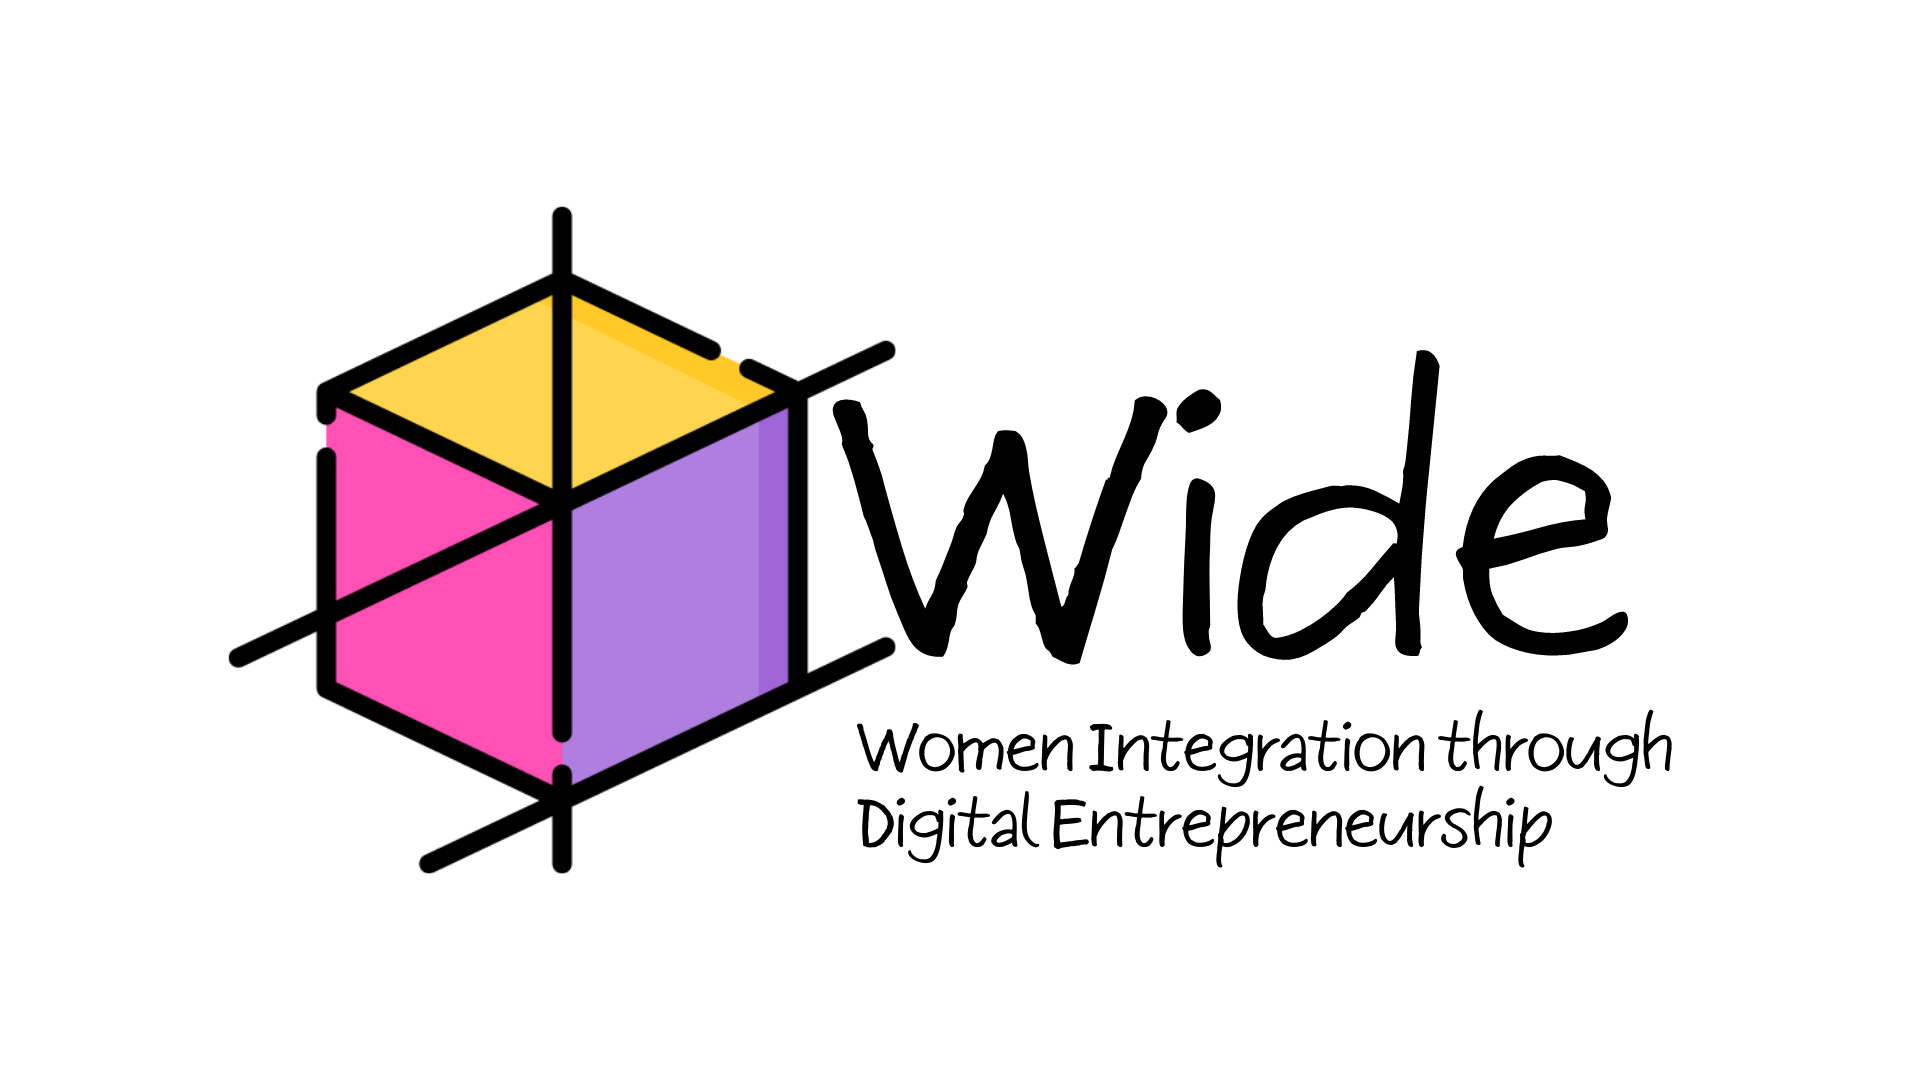 Training modules for women entrepreneurs are available online on the WIDE OER Platform